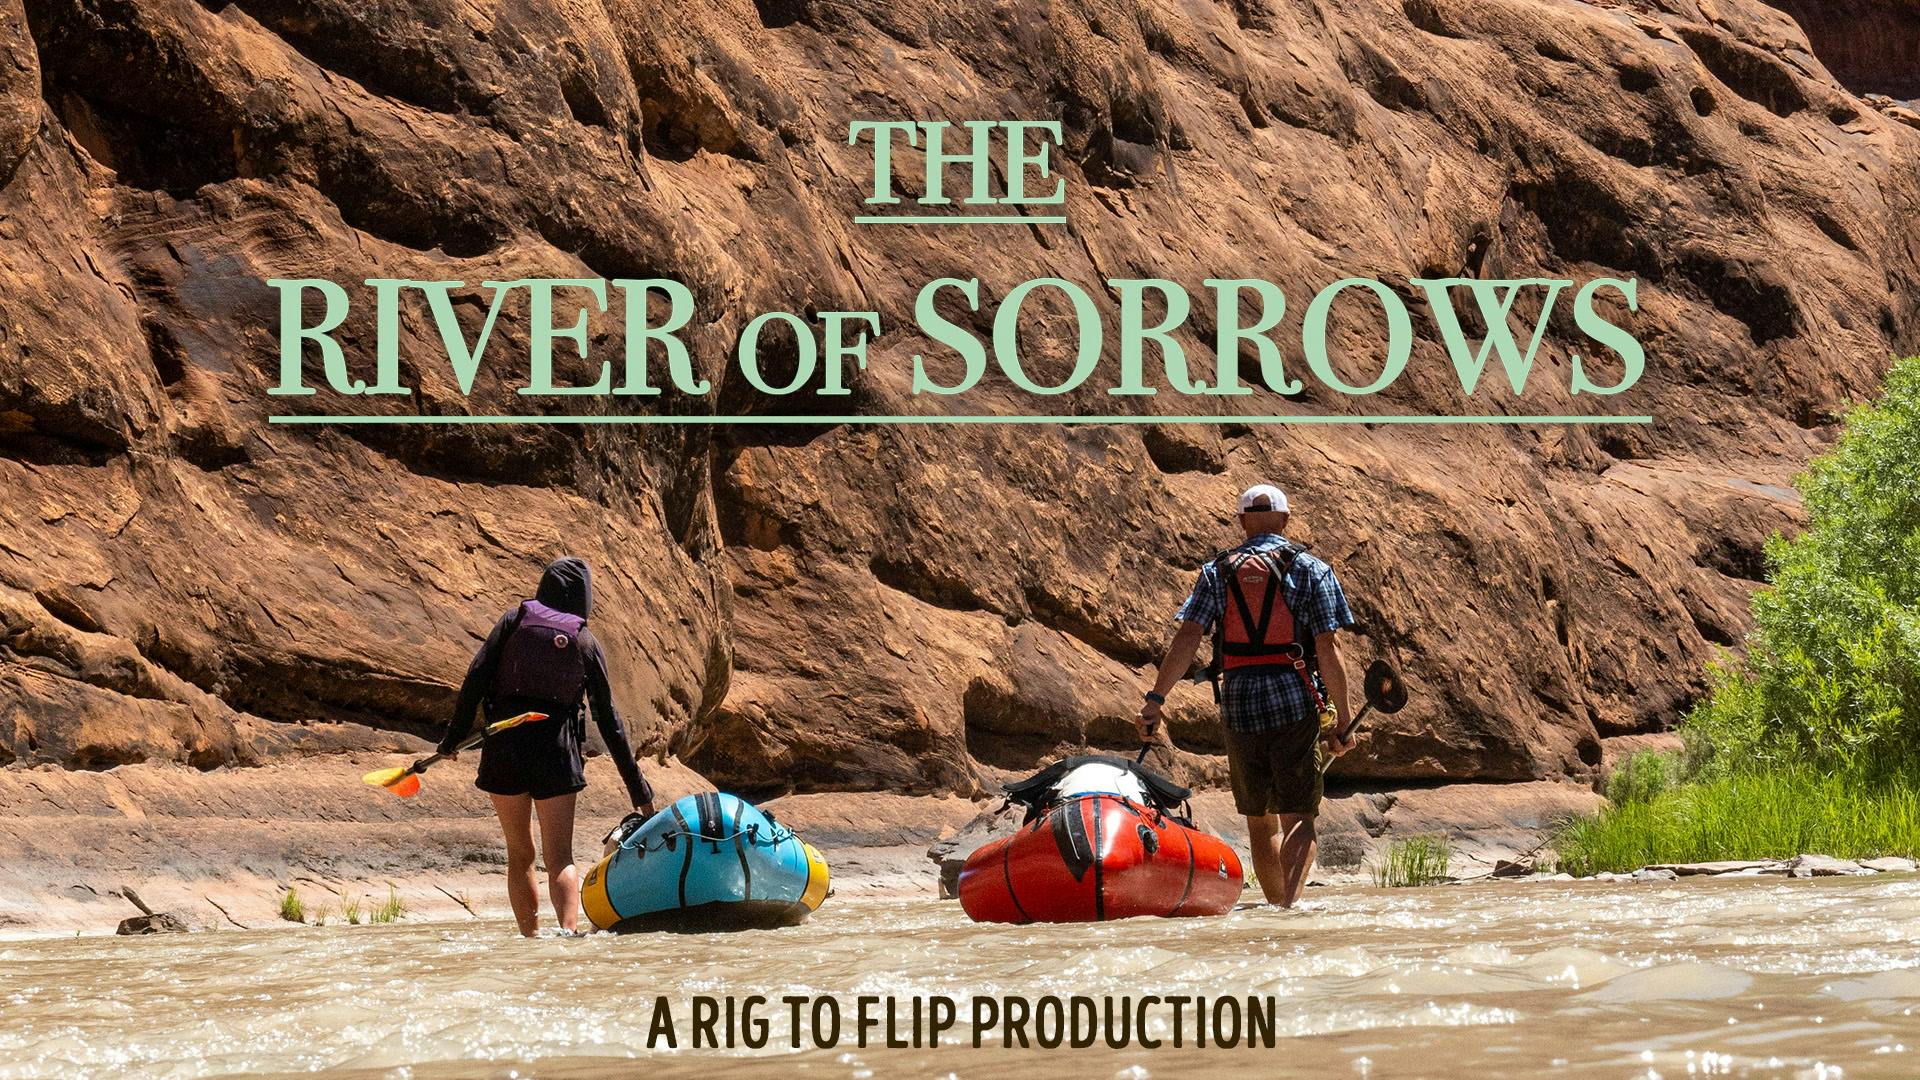 The River of Sorrows